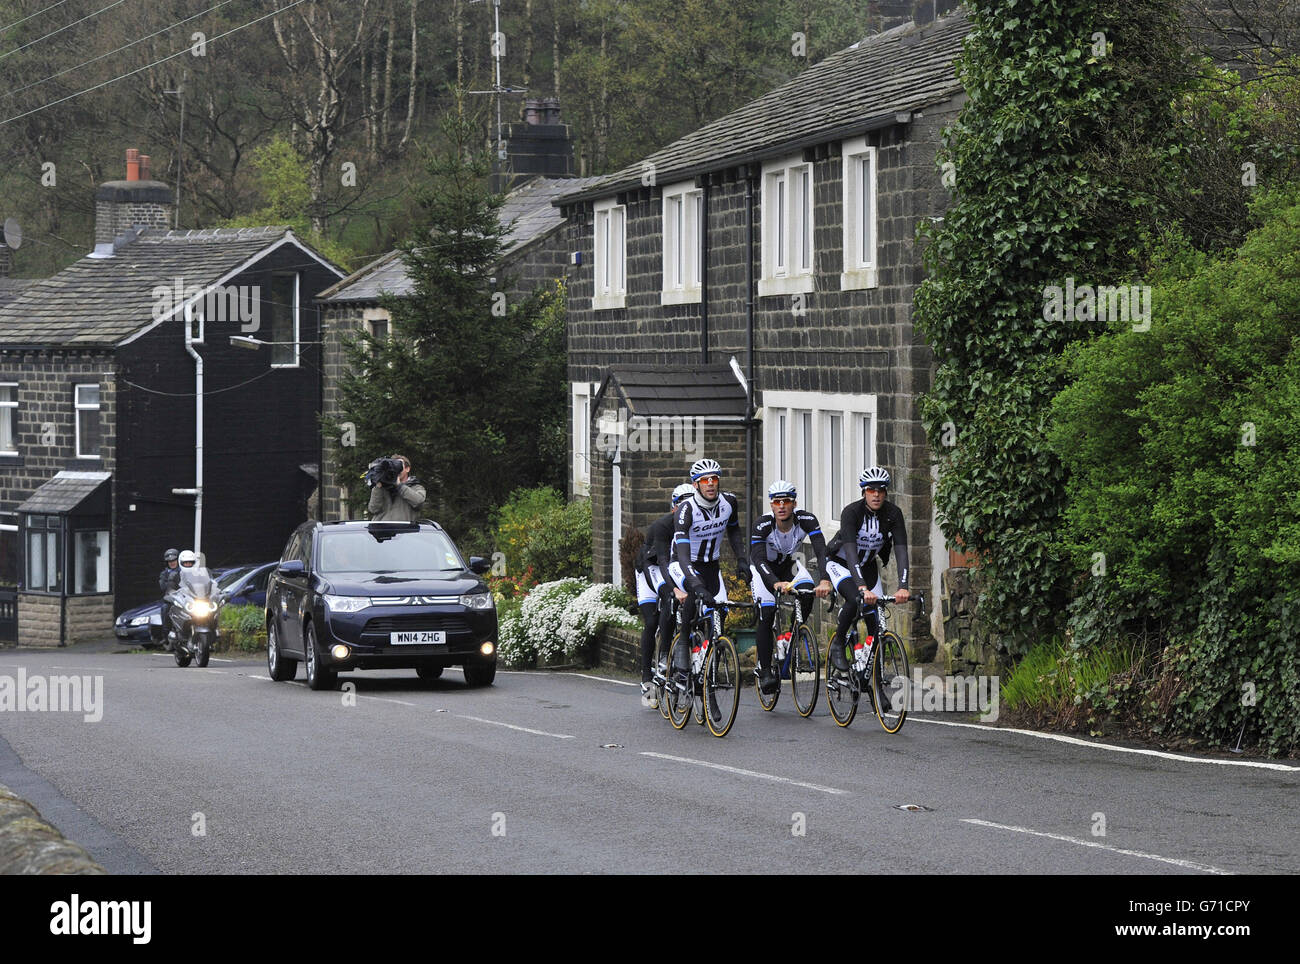 Riders from the Giant Shimano Cycle Race Team including John Degenkolb and Marcel Kittel ride the route of the Tour de France Stage 2 as they climb upto the moors above Cragg Vale in rain and mist during a training run ahead of their media day in Leeds. They are the first of the Tour de France Teams to come and look at the opening stages of the Race to be held in Yorkshire. Stock Photo